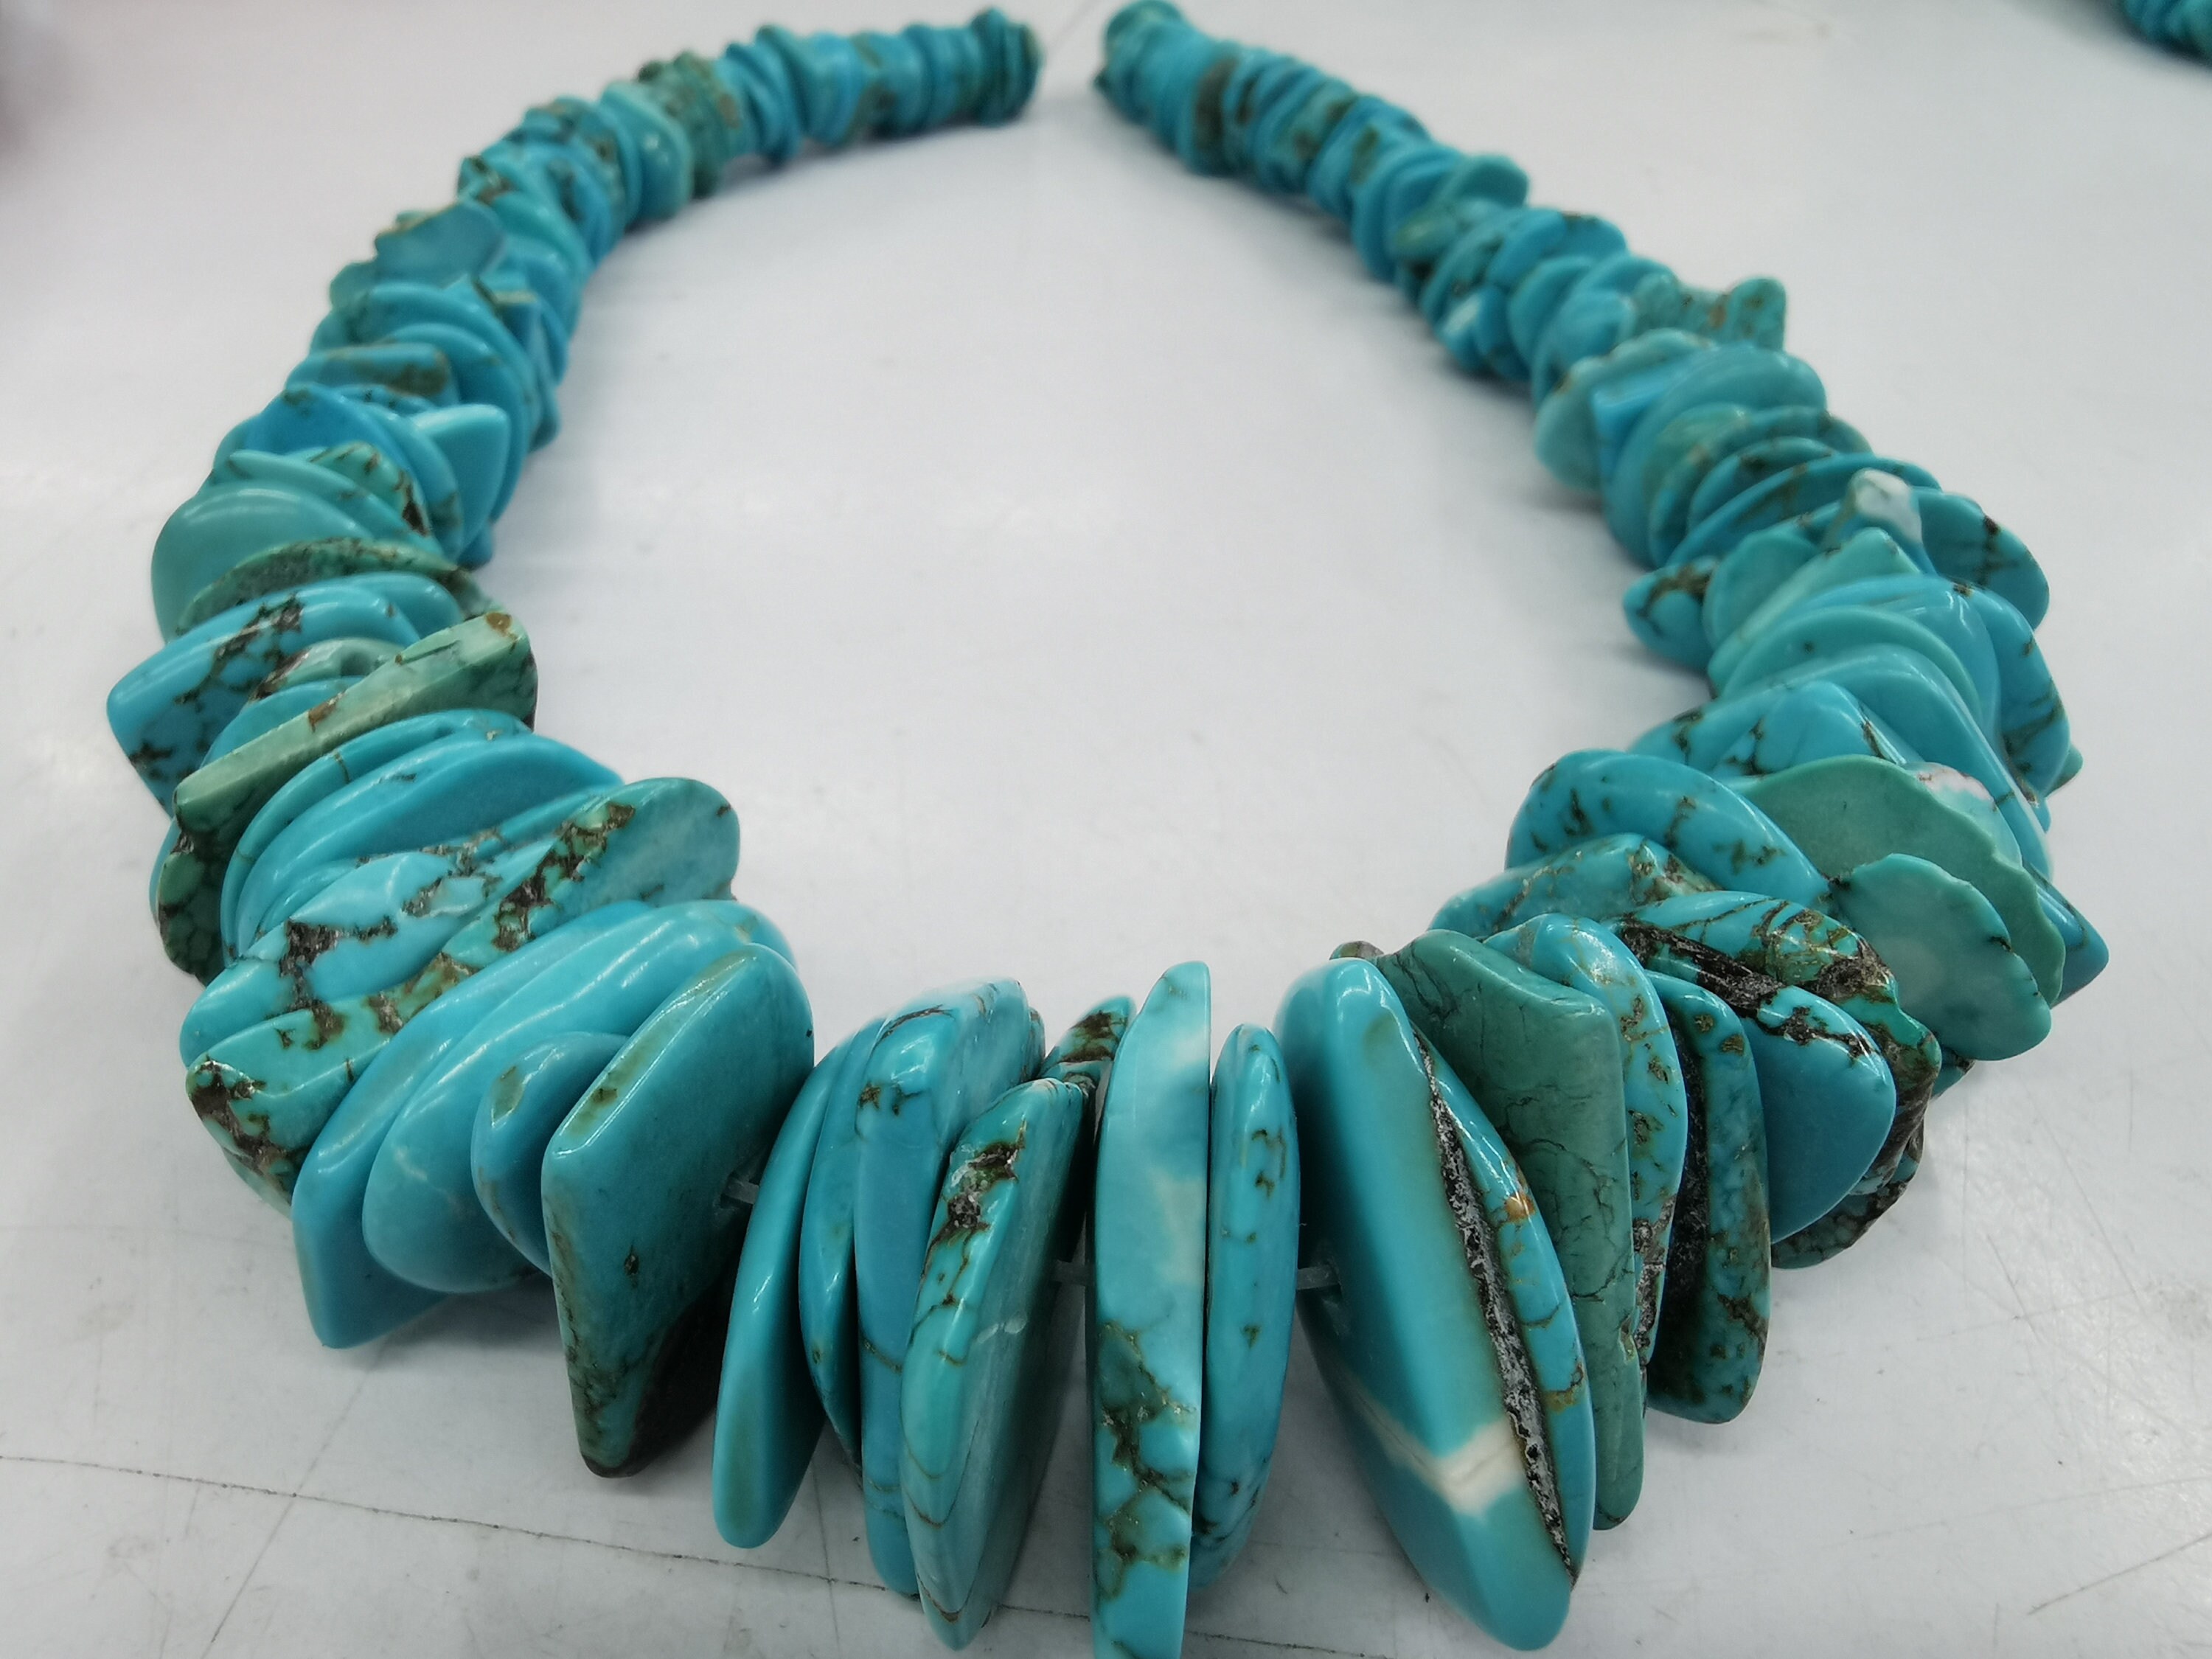  qbodp 5 Strings of Turquoise Beads for Jewelry Making